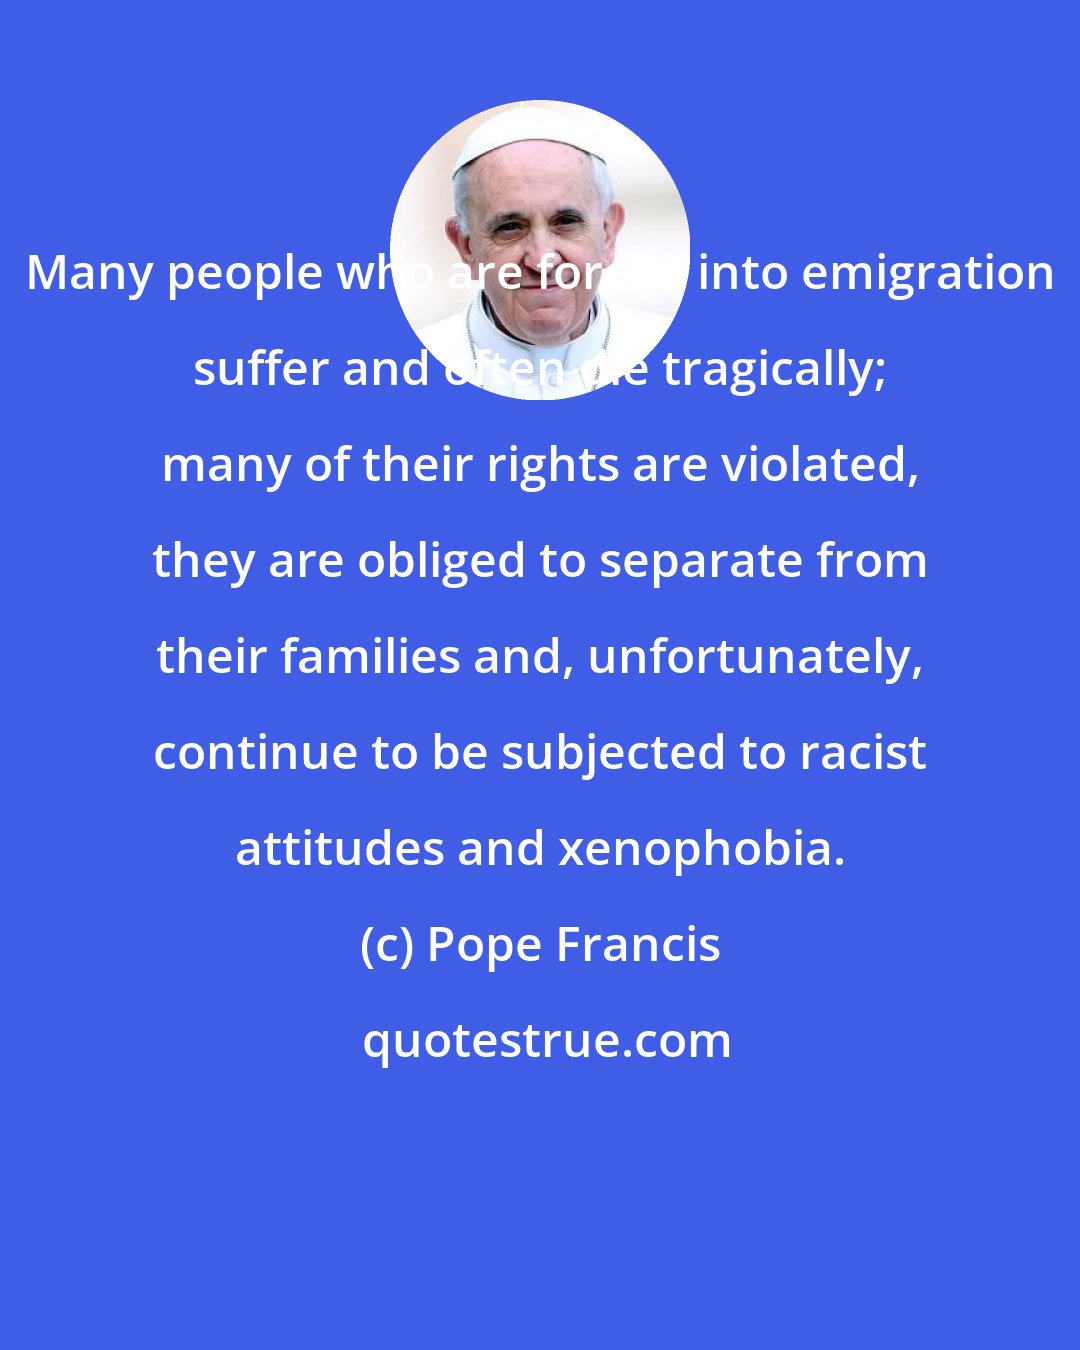 Pope Francis: Many people who are forced into emigration suffer and often die tragically; many of their rights are violated, they are obliged to separate from their families and, unfortunately, continue to be subjected to racist attitudes and xenophobia.